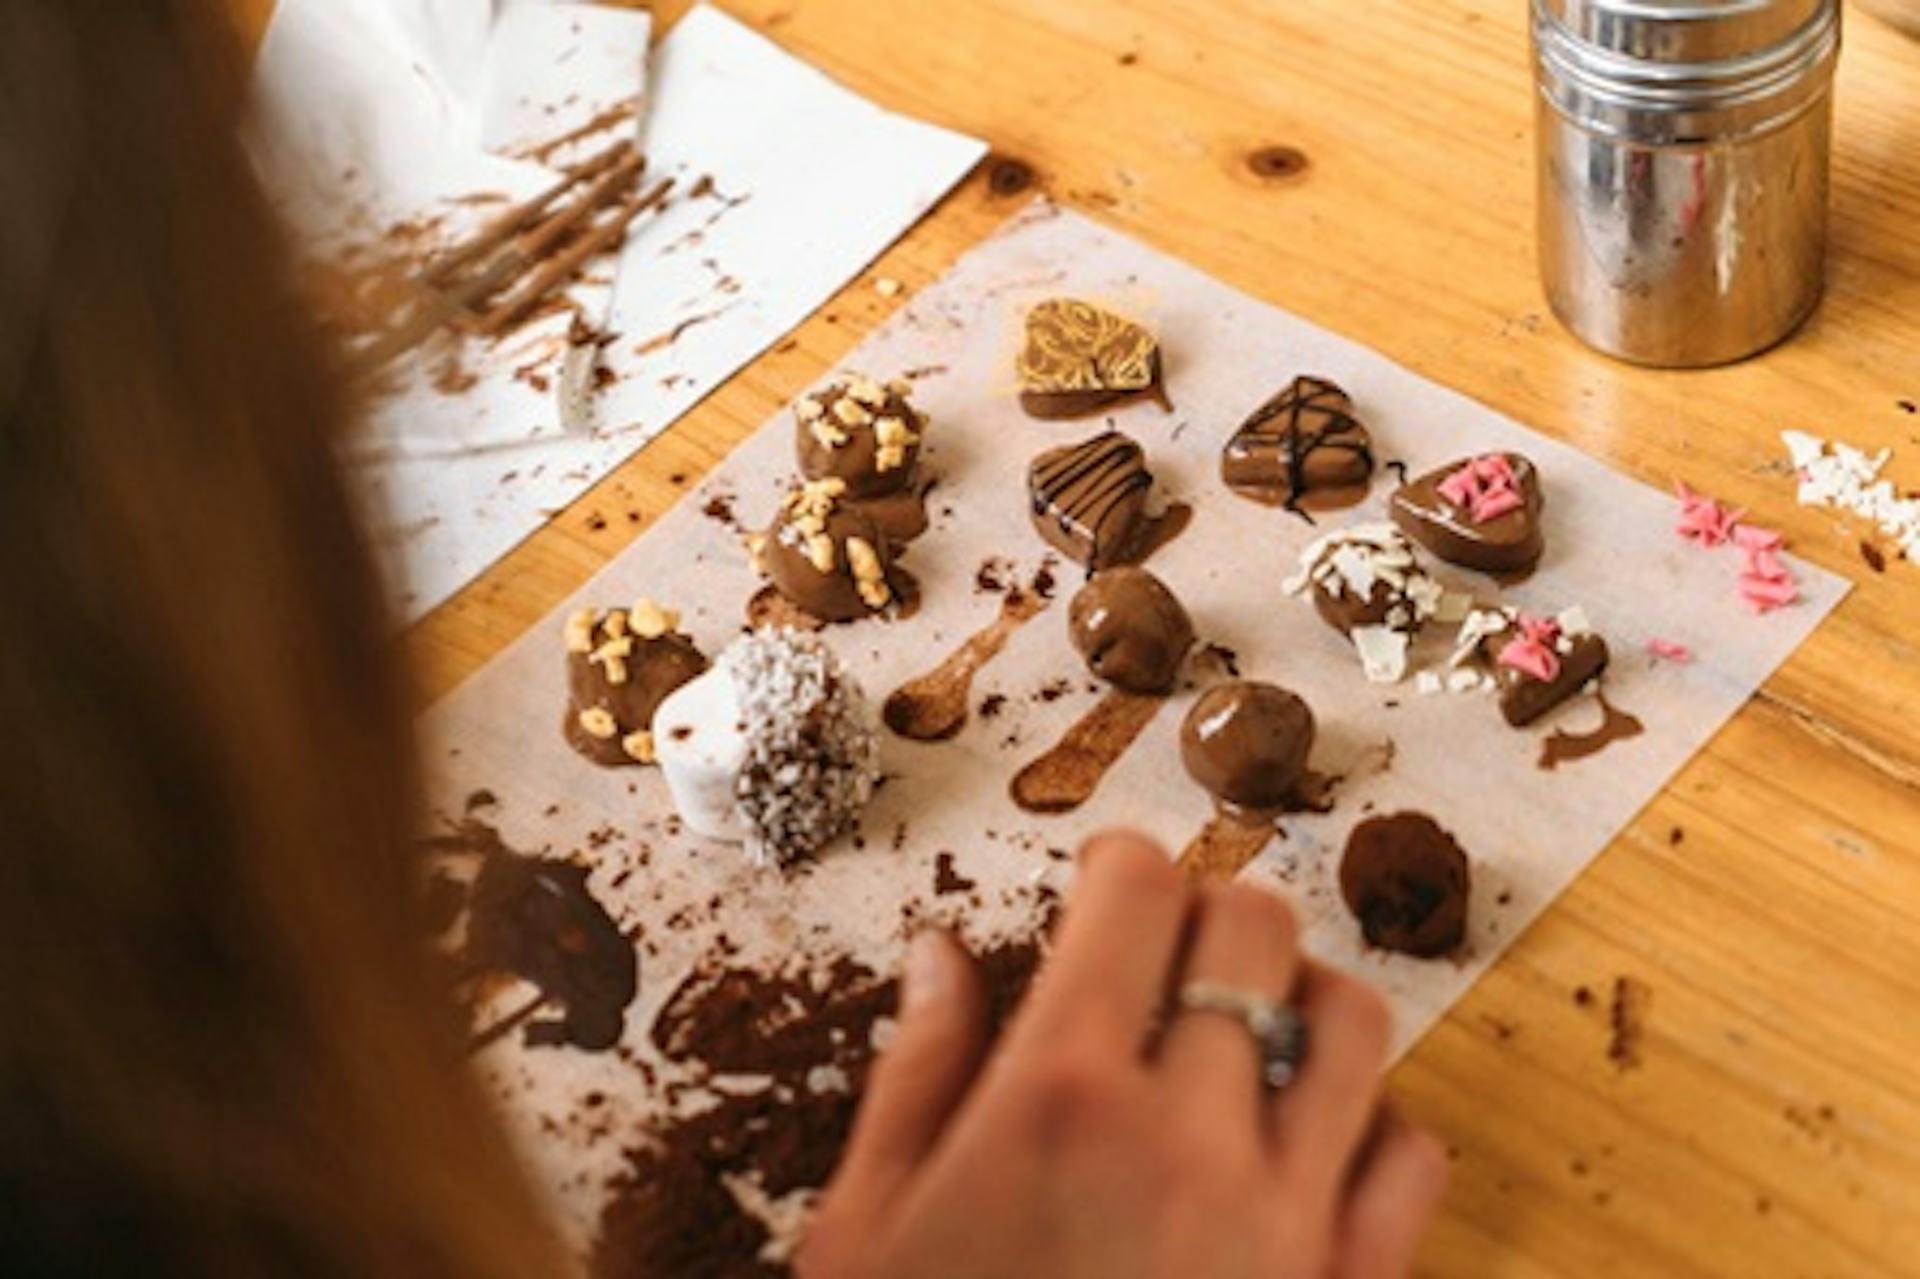 Live Online Chocolate Truffle Making Experience with My Chocolate